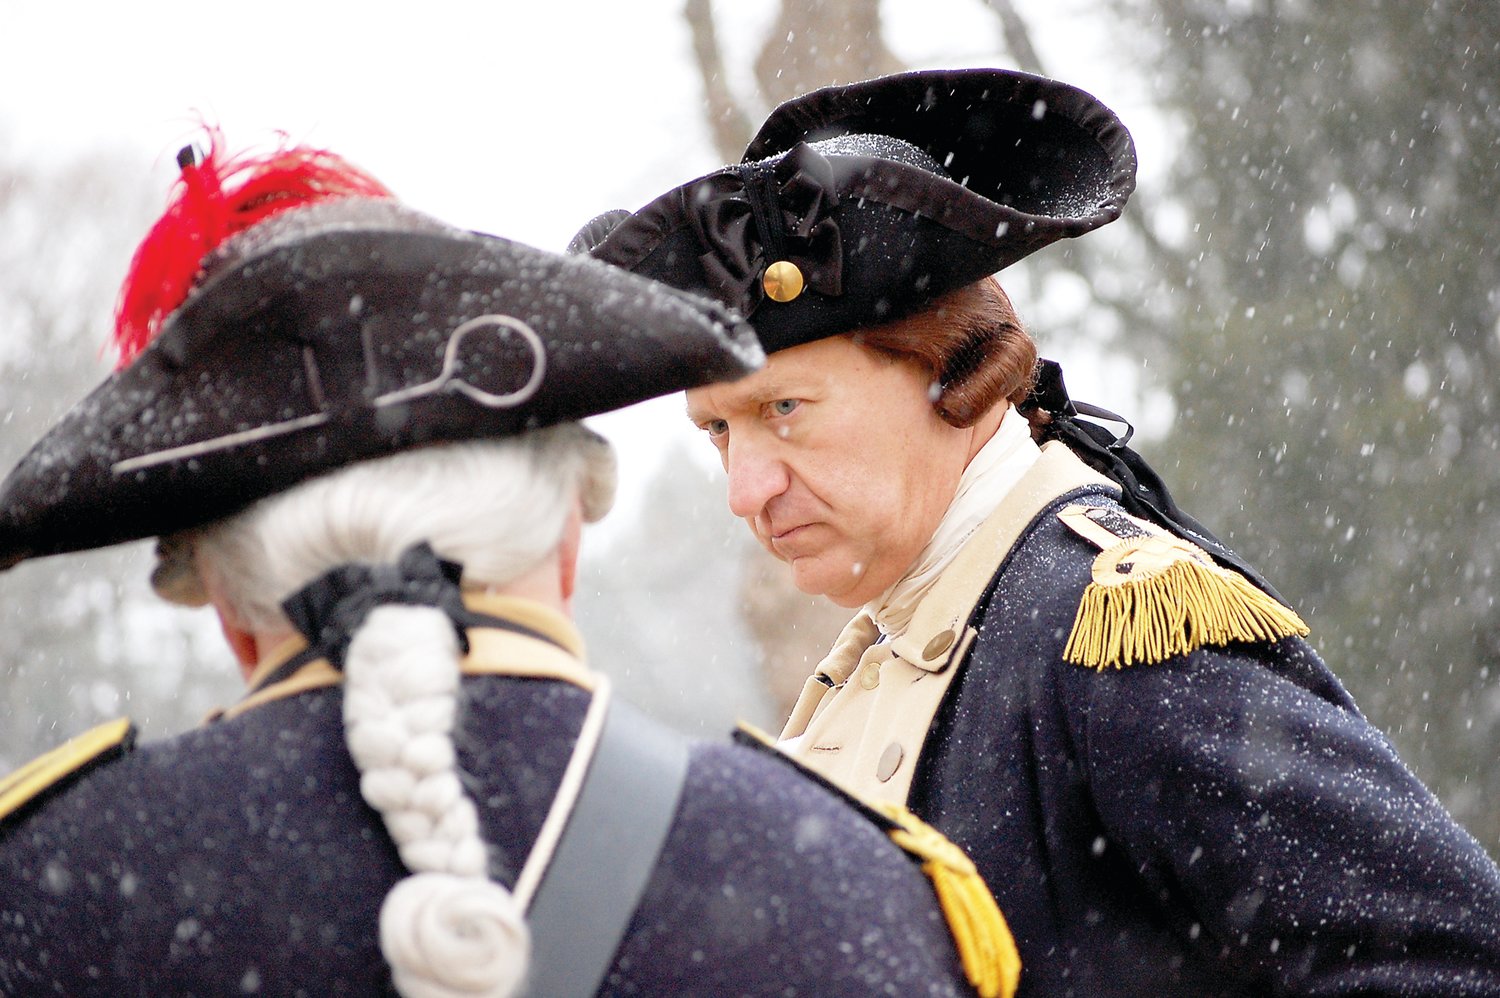 “George Washington” confers with an officer.